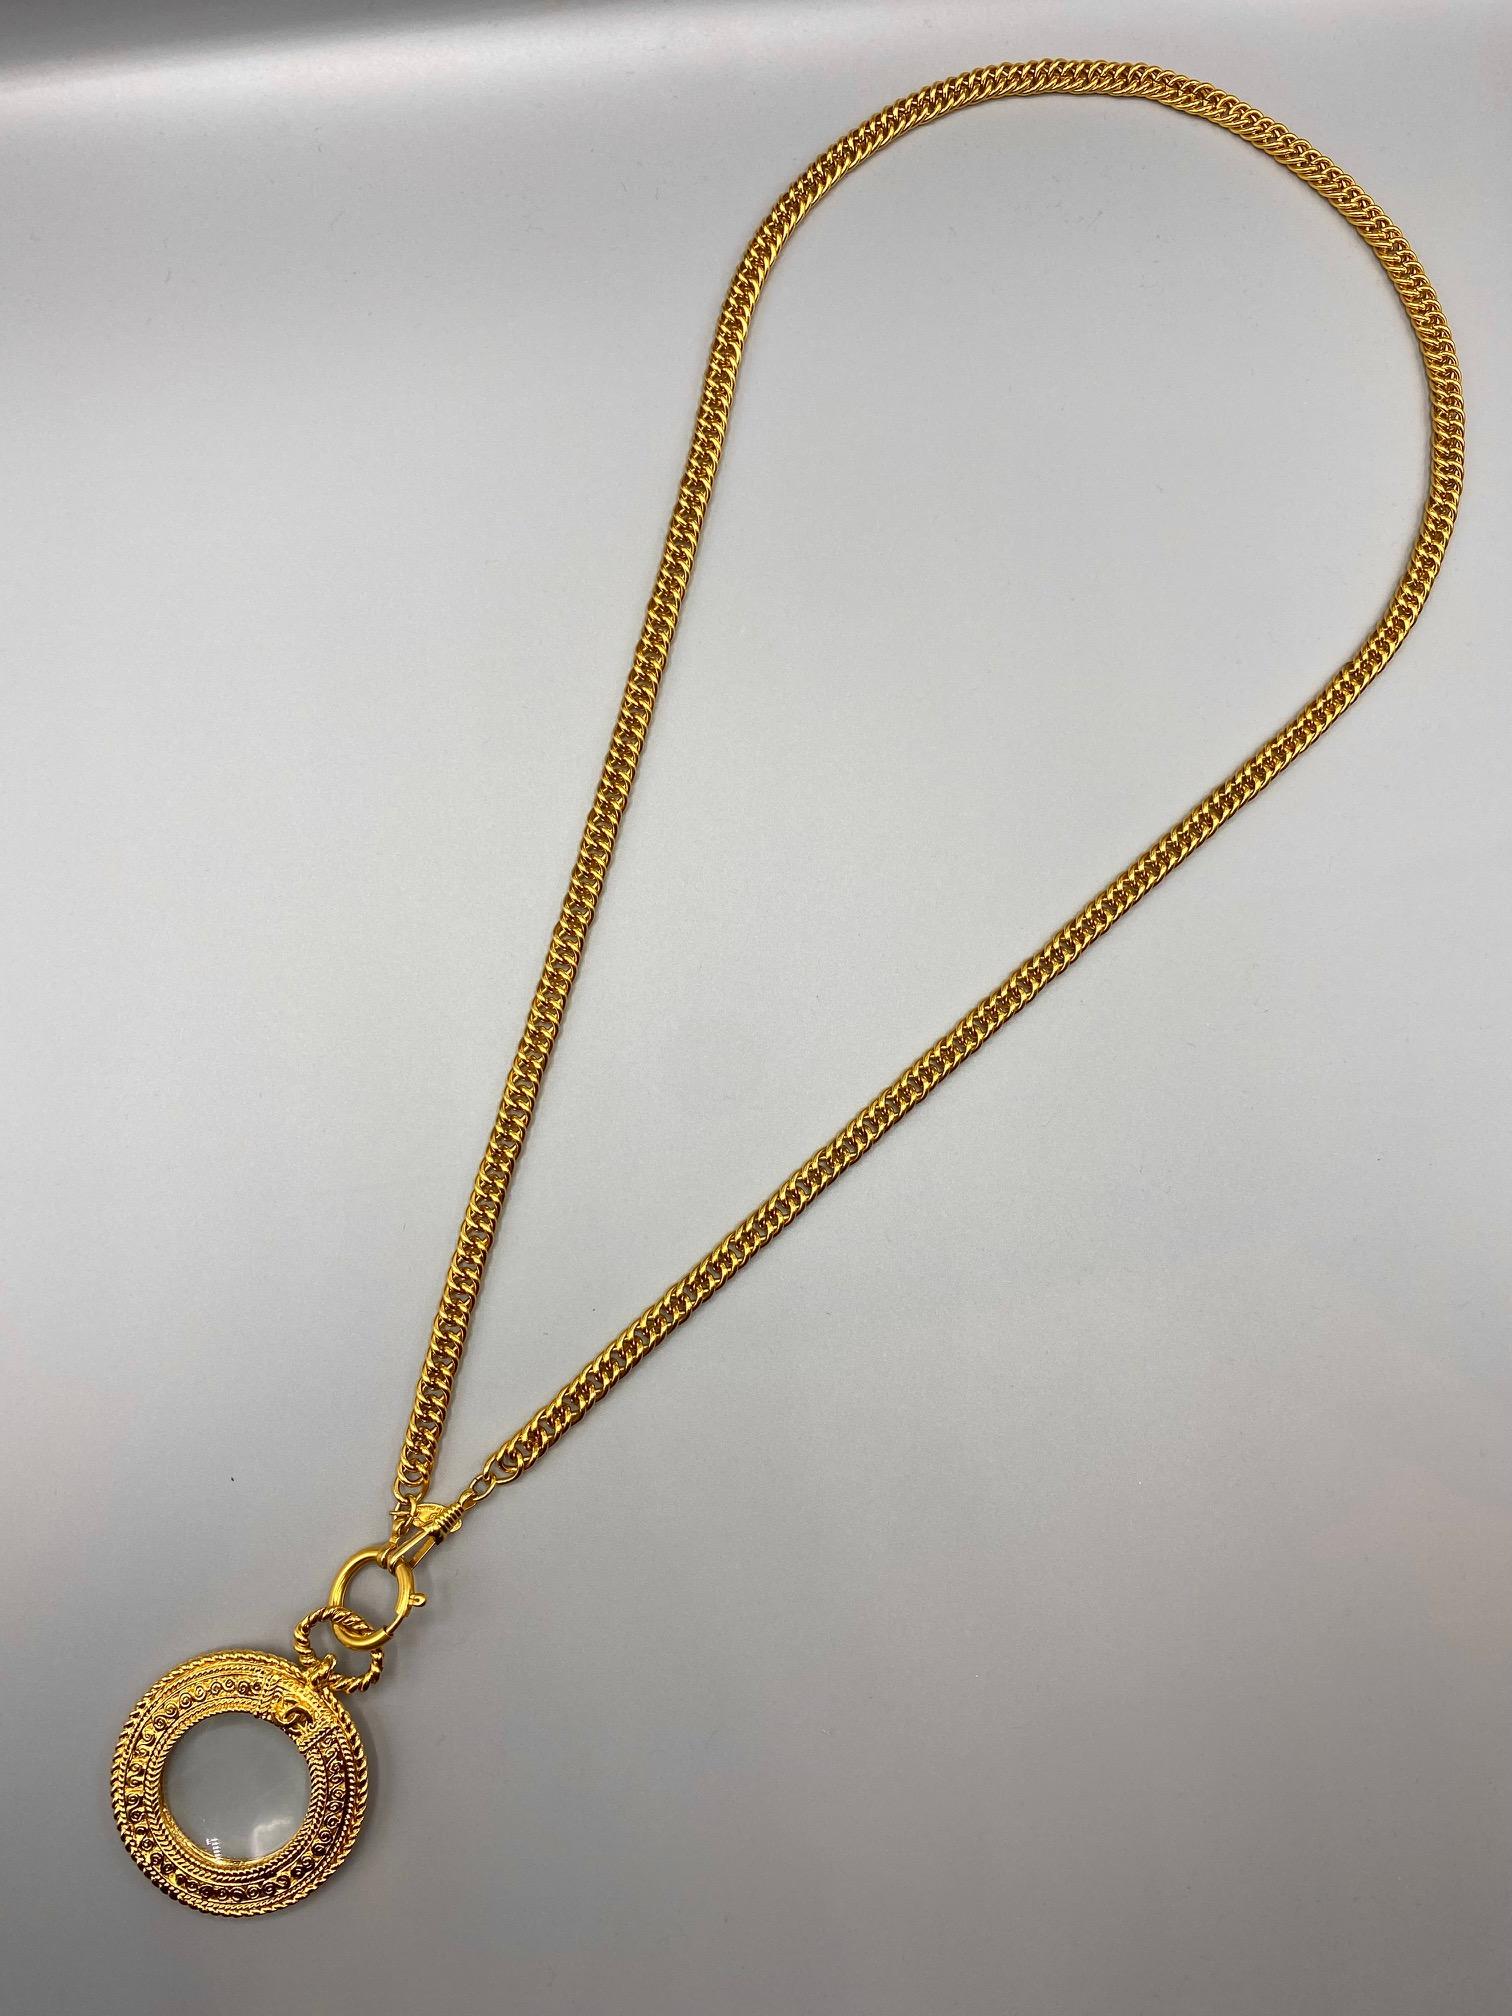 An excellent condition early 1980s Chanel necklace with magnifying glass pendant necklace. The 18K gold plate magnifying pendant is a classic style made famous by the House of Chanel. The pendant is 2.13 inches in diameter and 2.75 inches tall with